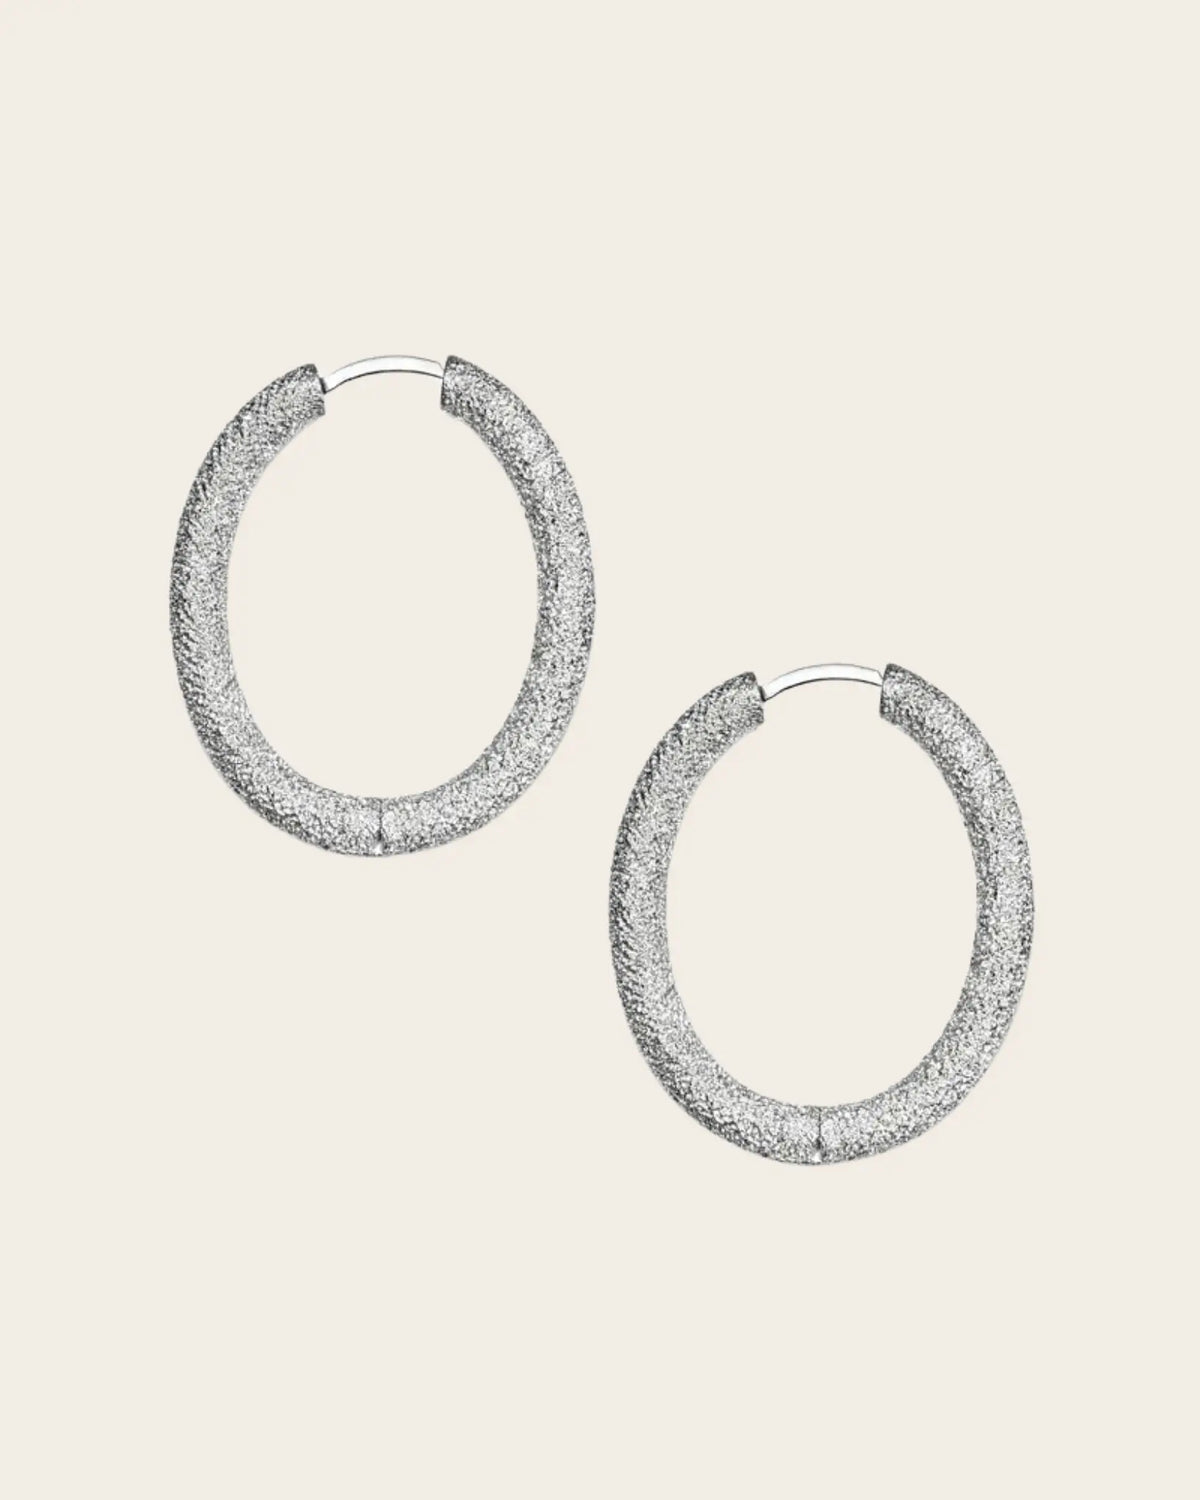 Small Oval Florentine Hoops Small Oval Florentine Hoops Carolina Bucci Carolina Bucci  Squash Blossom Vail